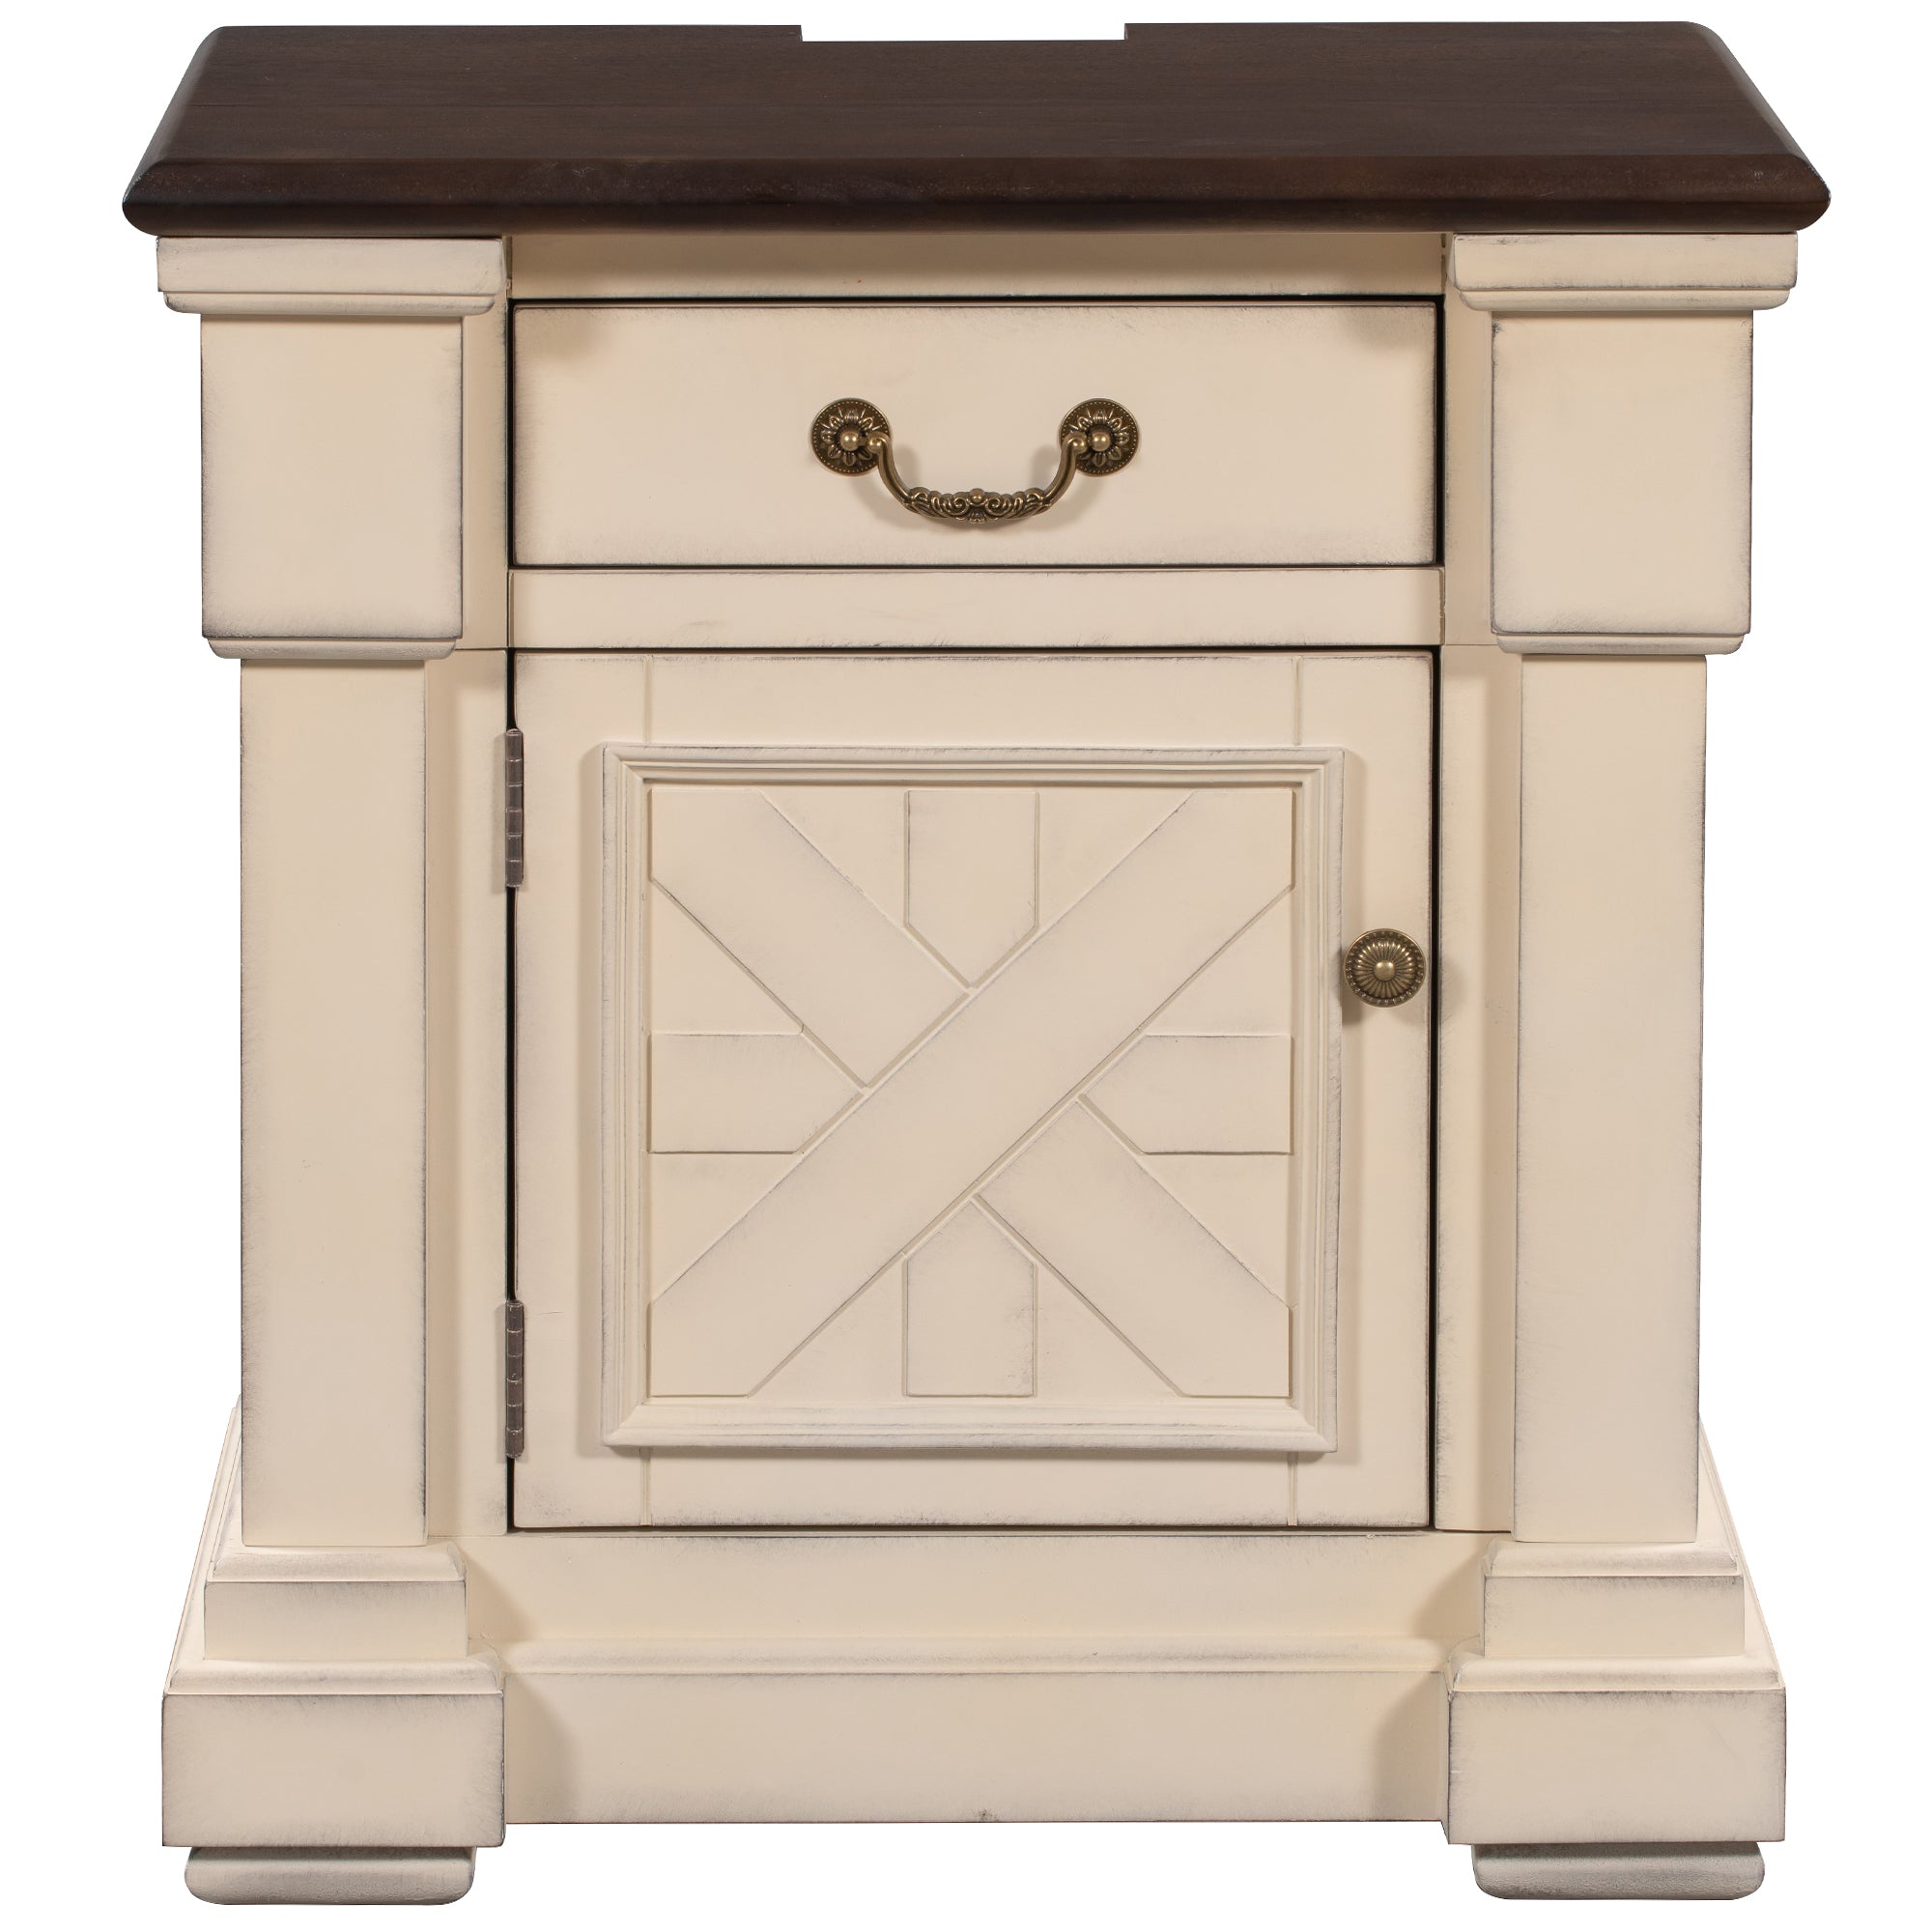 1 Drawer Wood Nightstand with USB Ports